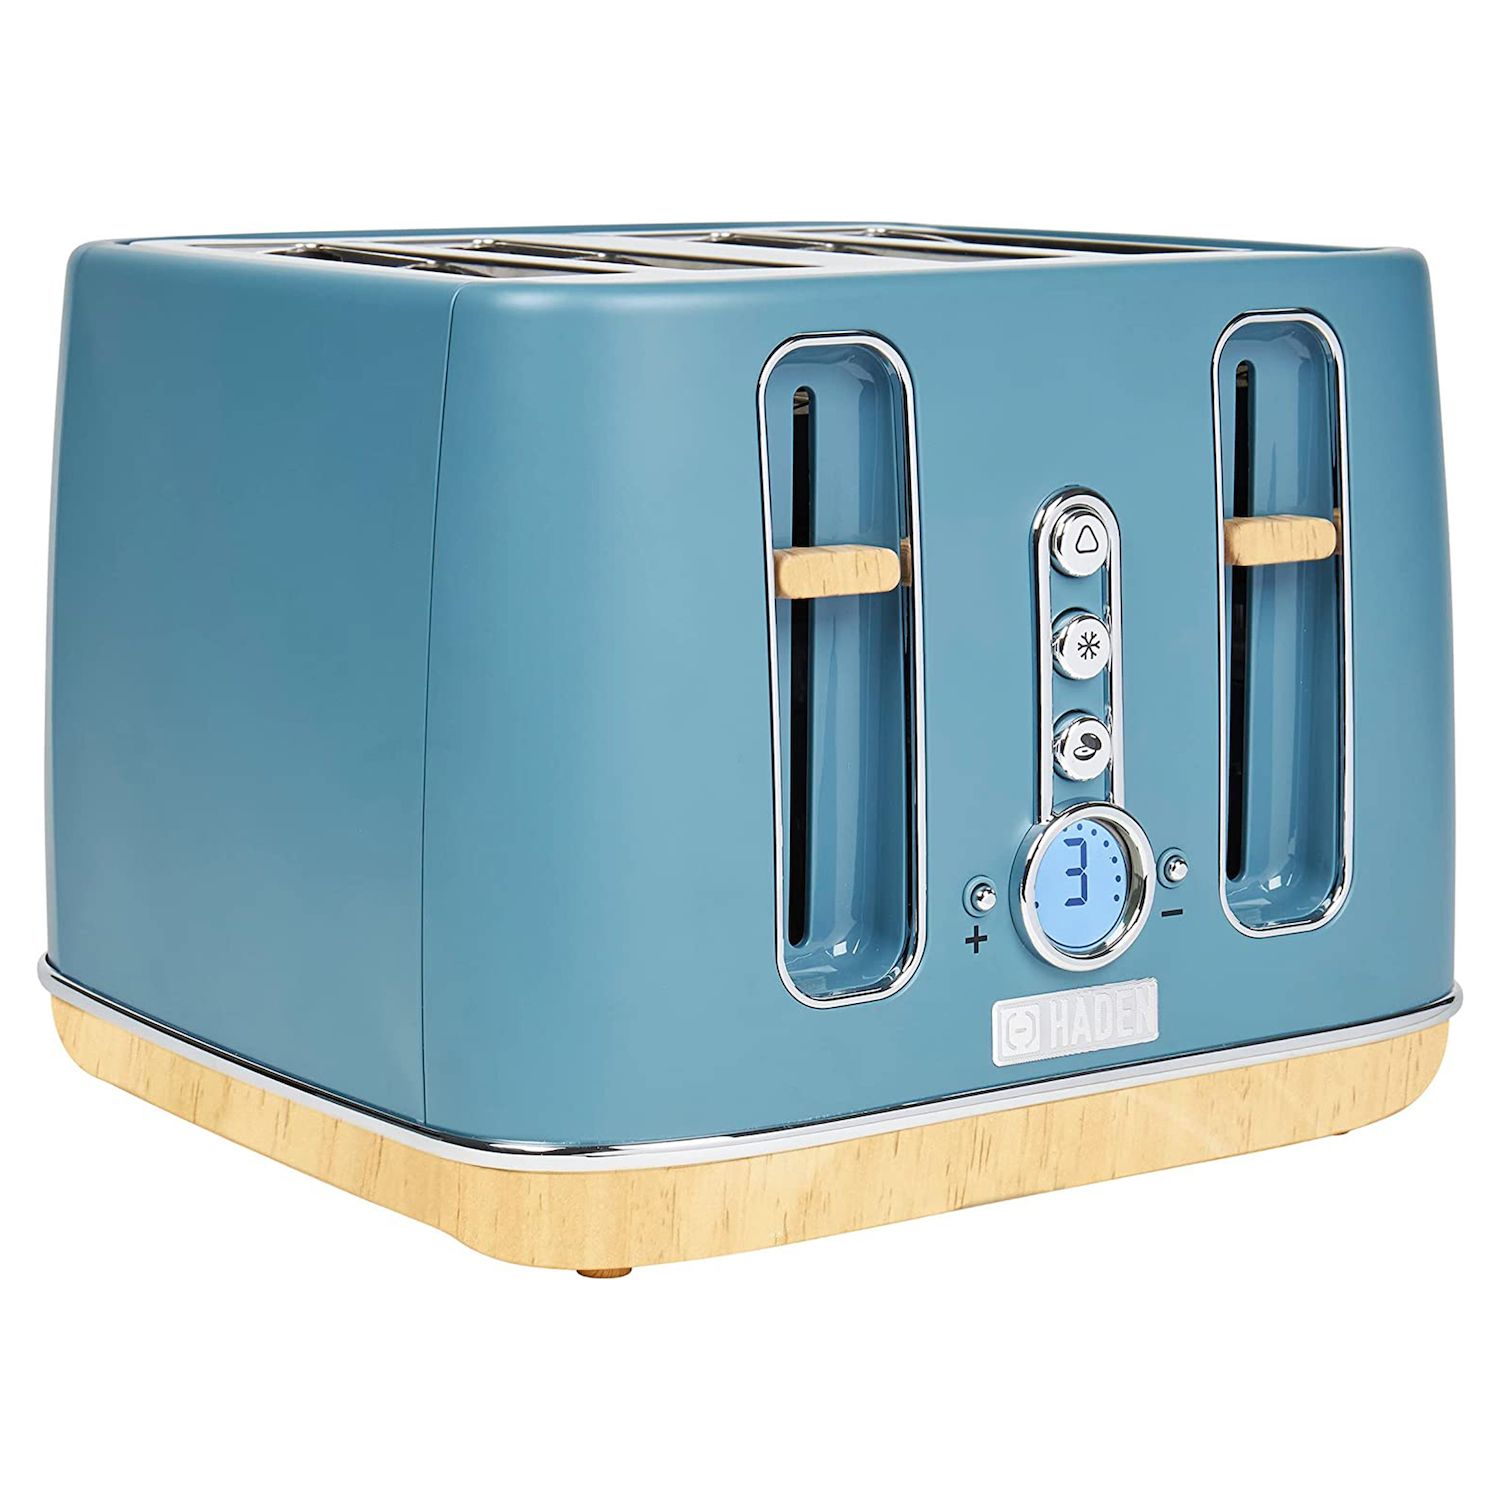 MegaChef Silver 4 Slice Toaster in Stainless Steel